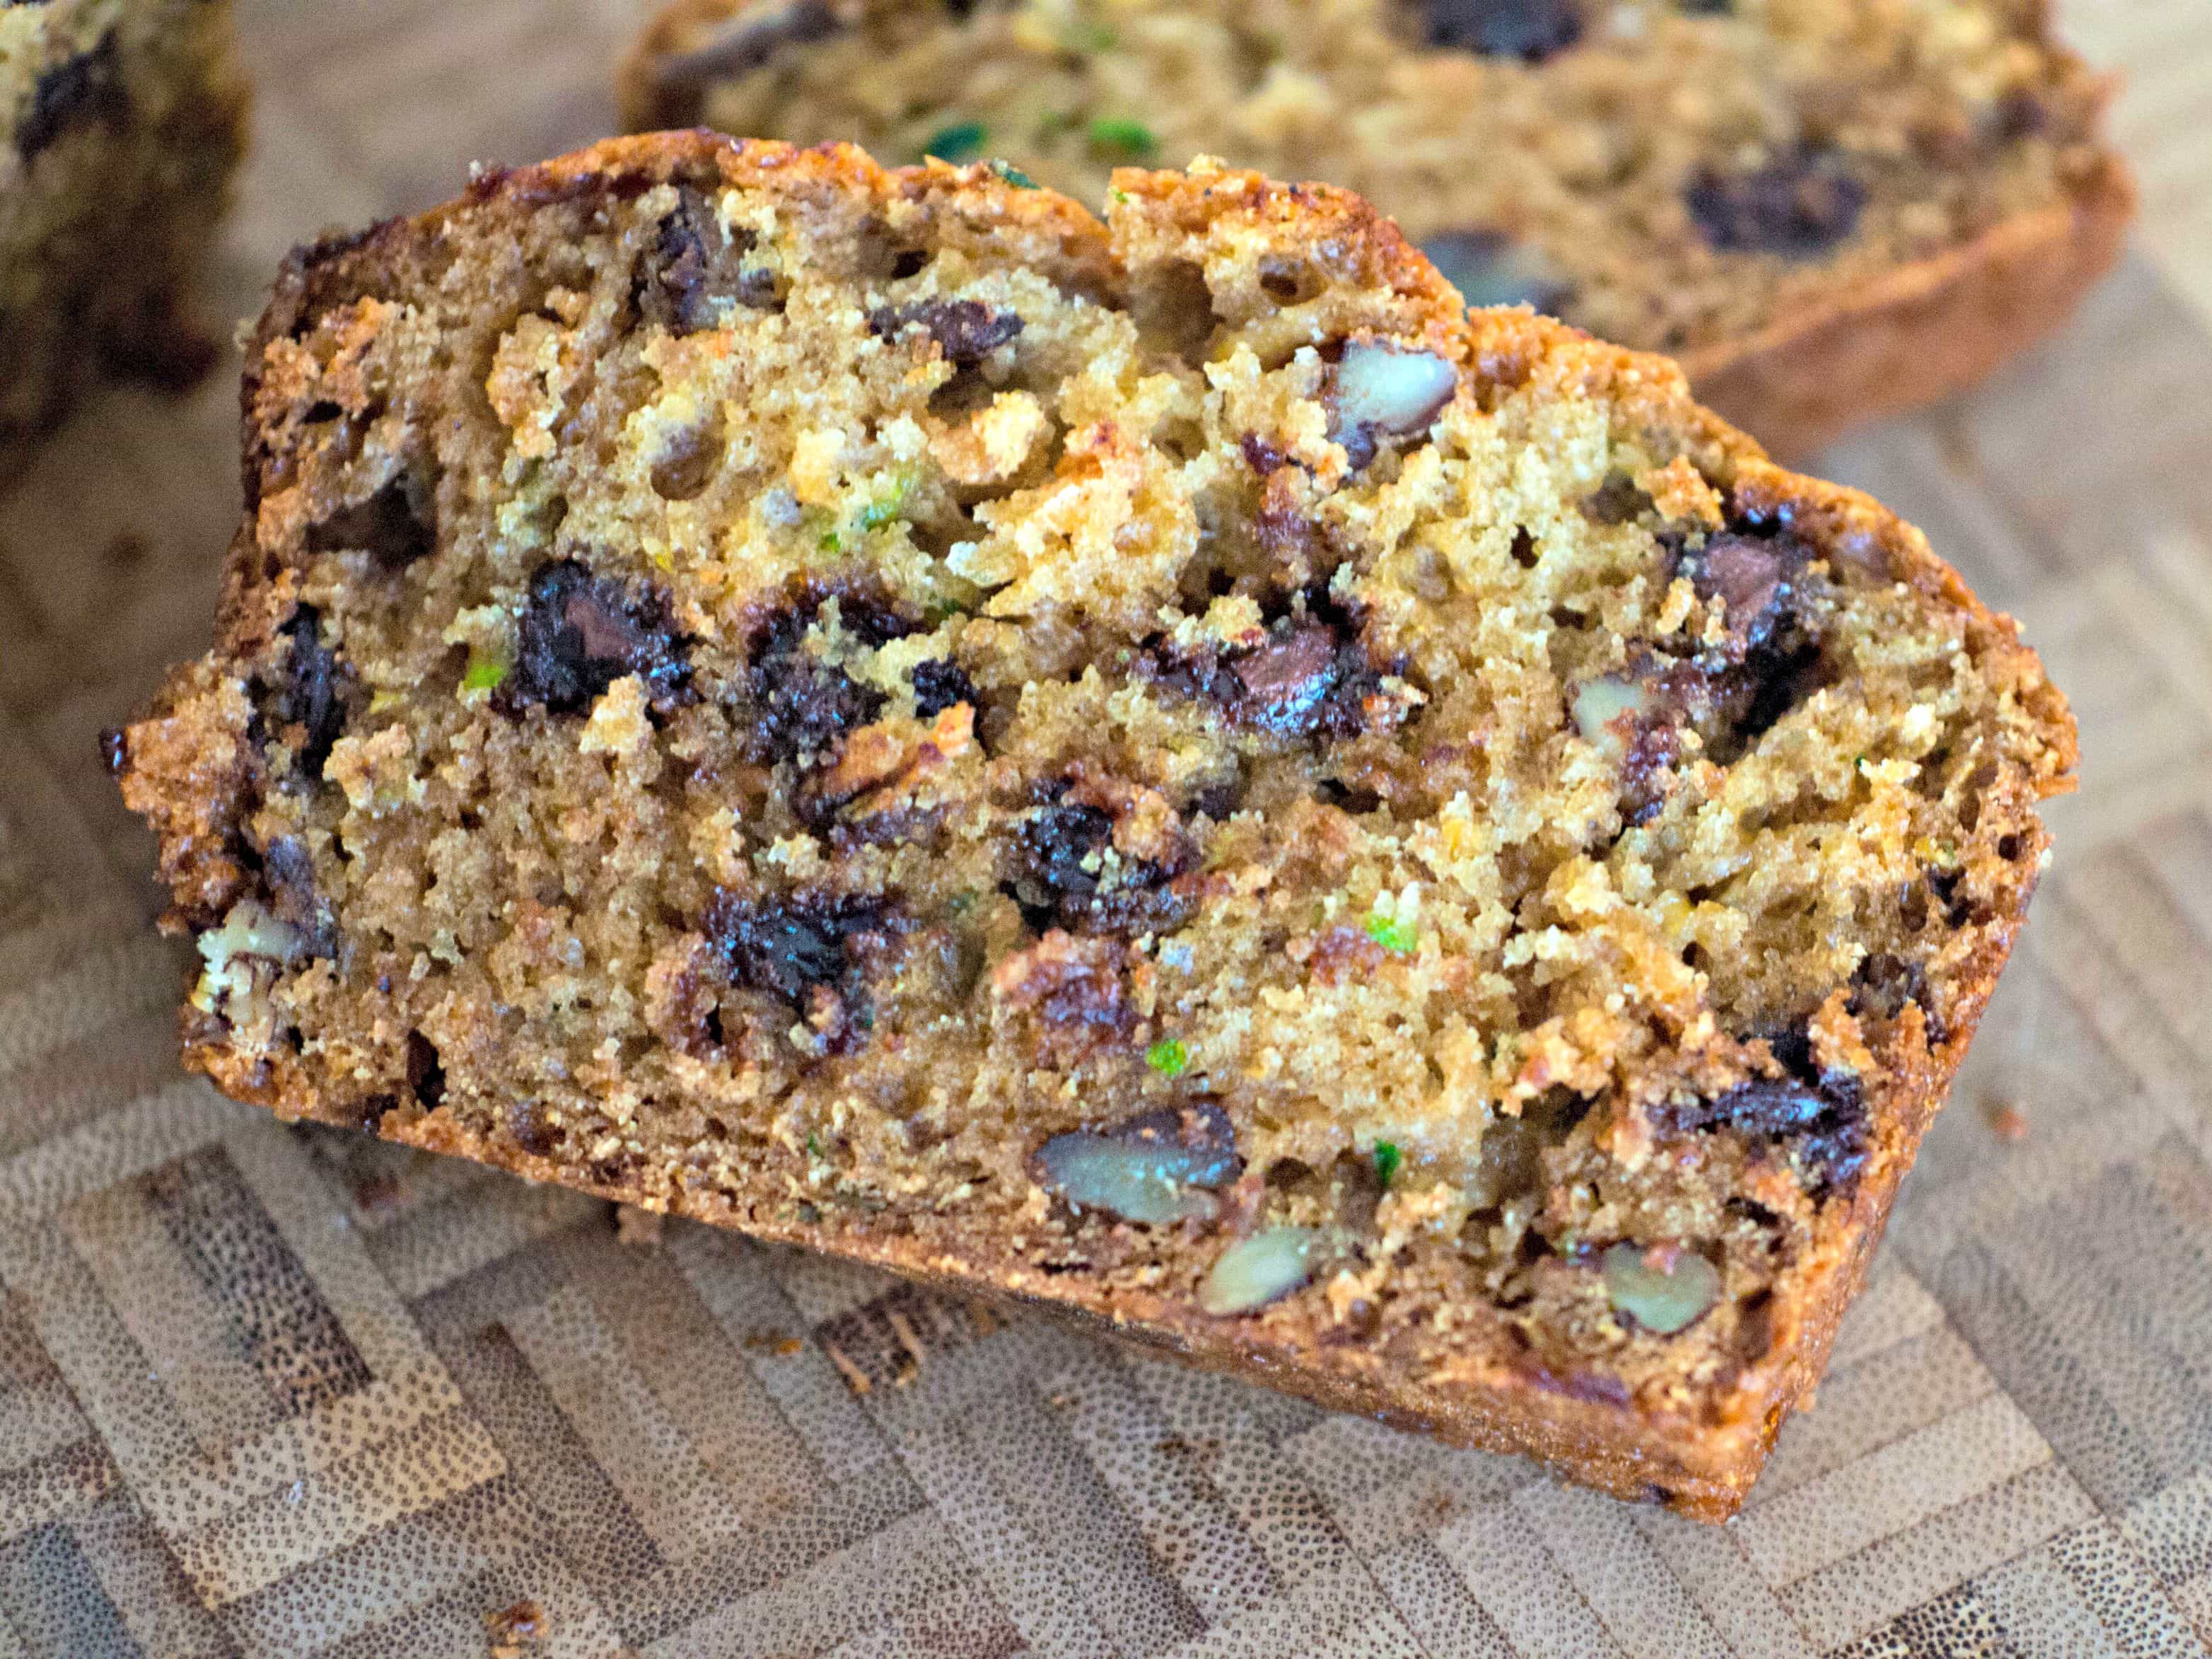 Chocolate Chip Zucchini Bread - this moist and tasty zucchini bread is a great way to use up extra zucchini from the garden.